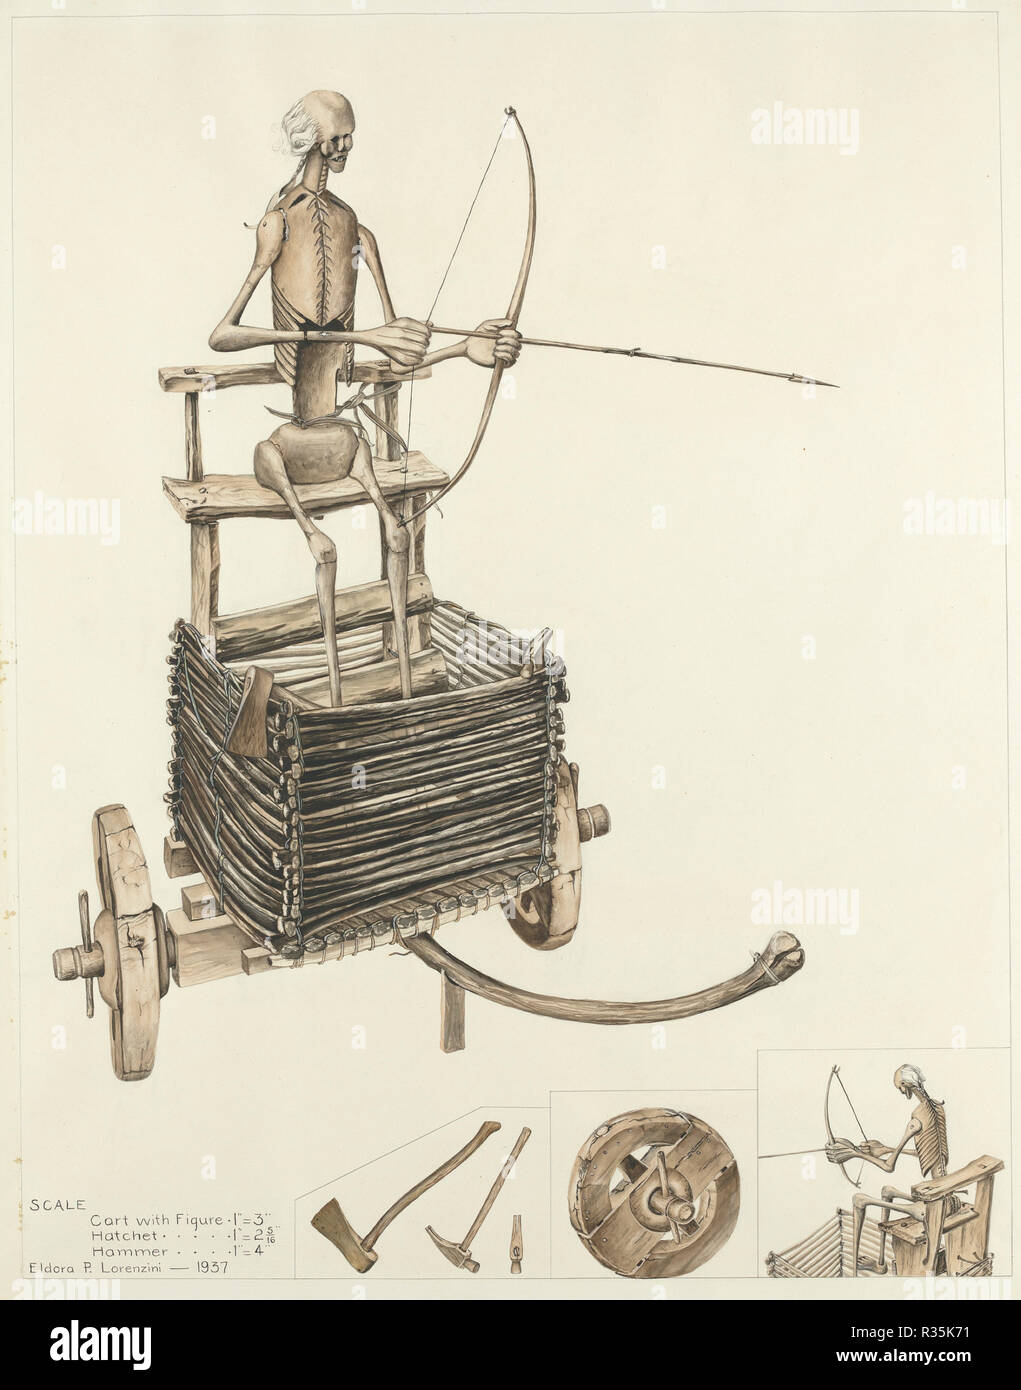 Death Angel and Cart. Dated: 1937. Dimensions: overall: 67.6 x 52.7 cm (26 5/8 x 20 3/4 in.)  Original IAD Object: 49 1/2' high; 22 1/2' deep. Medium: watercolor and graphite on paper. Museum: National Gallery of Art, Washington DC. Author: Eldora P. Lorenzini. Stock Photo